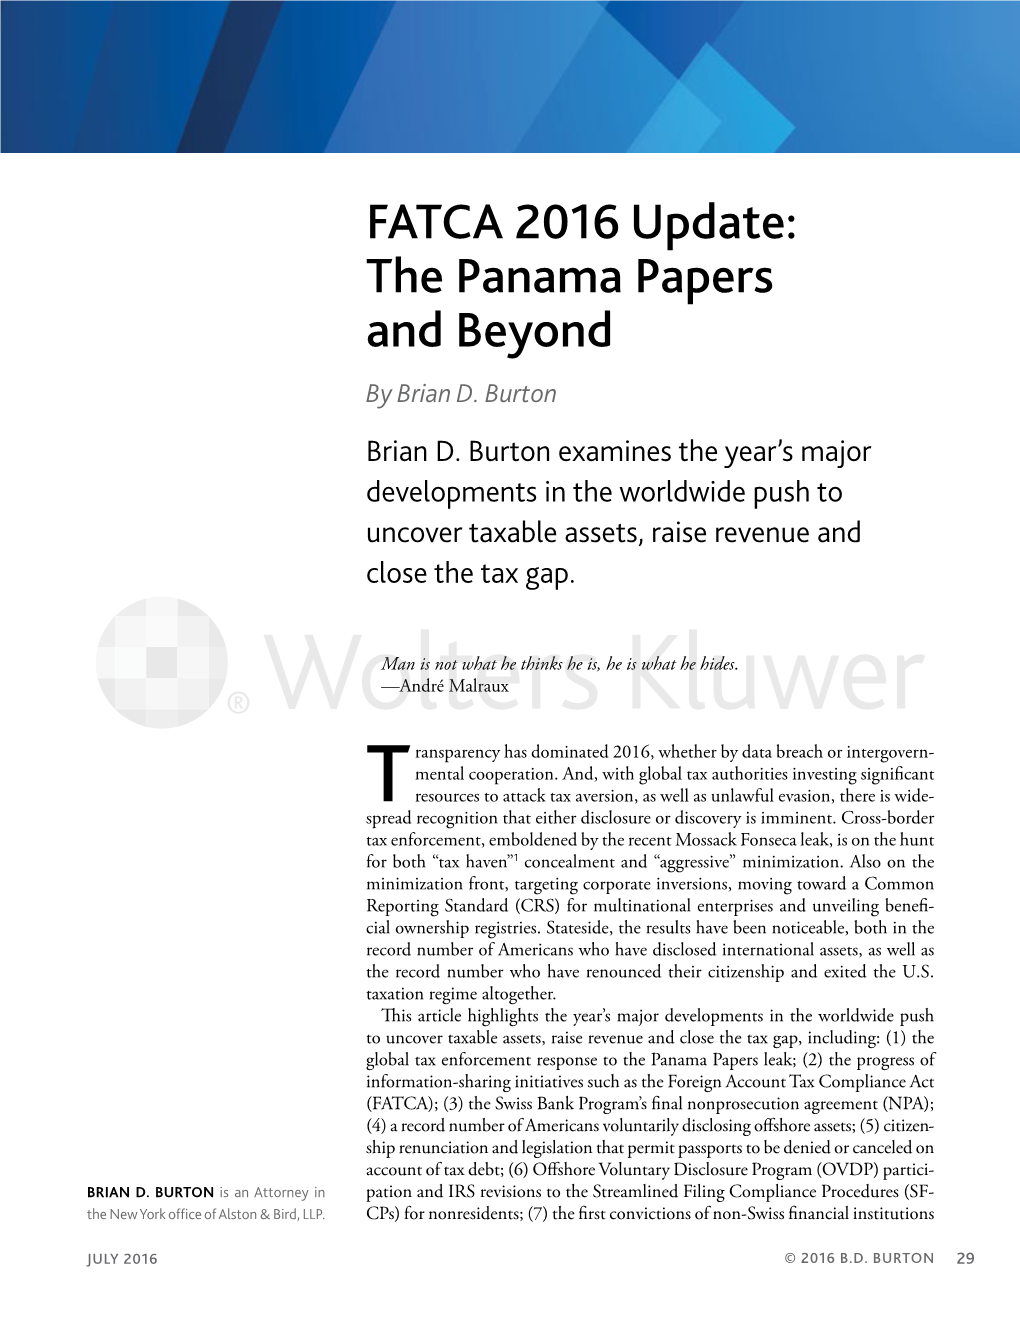 FATCA 2016 Update: the Panama Papers and Beyond by Brian D